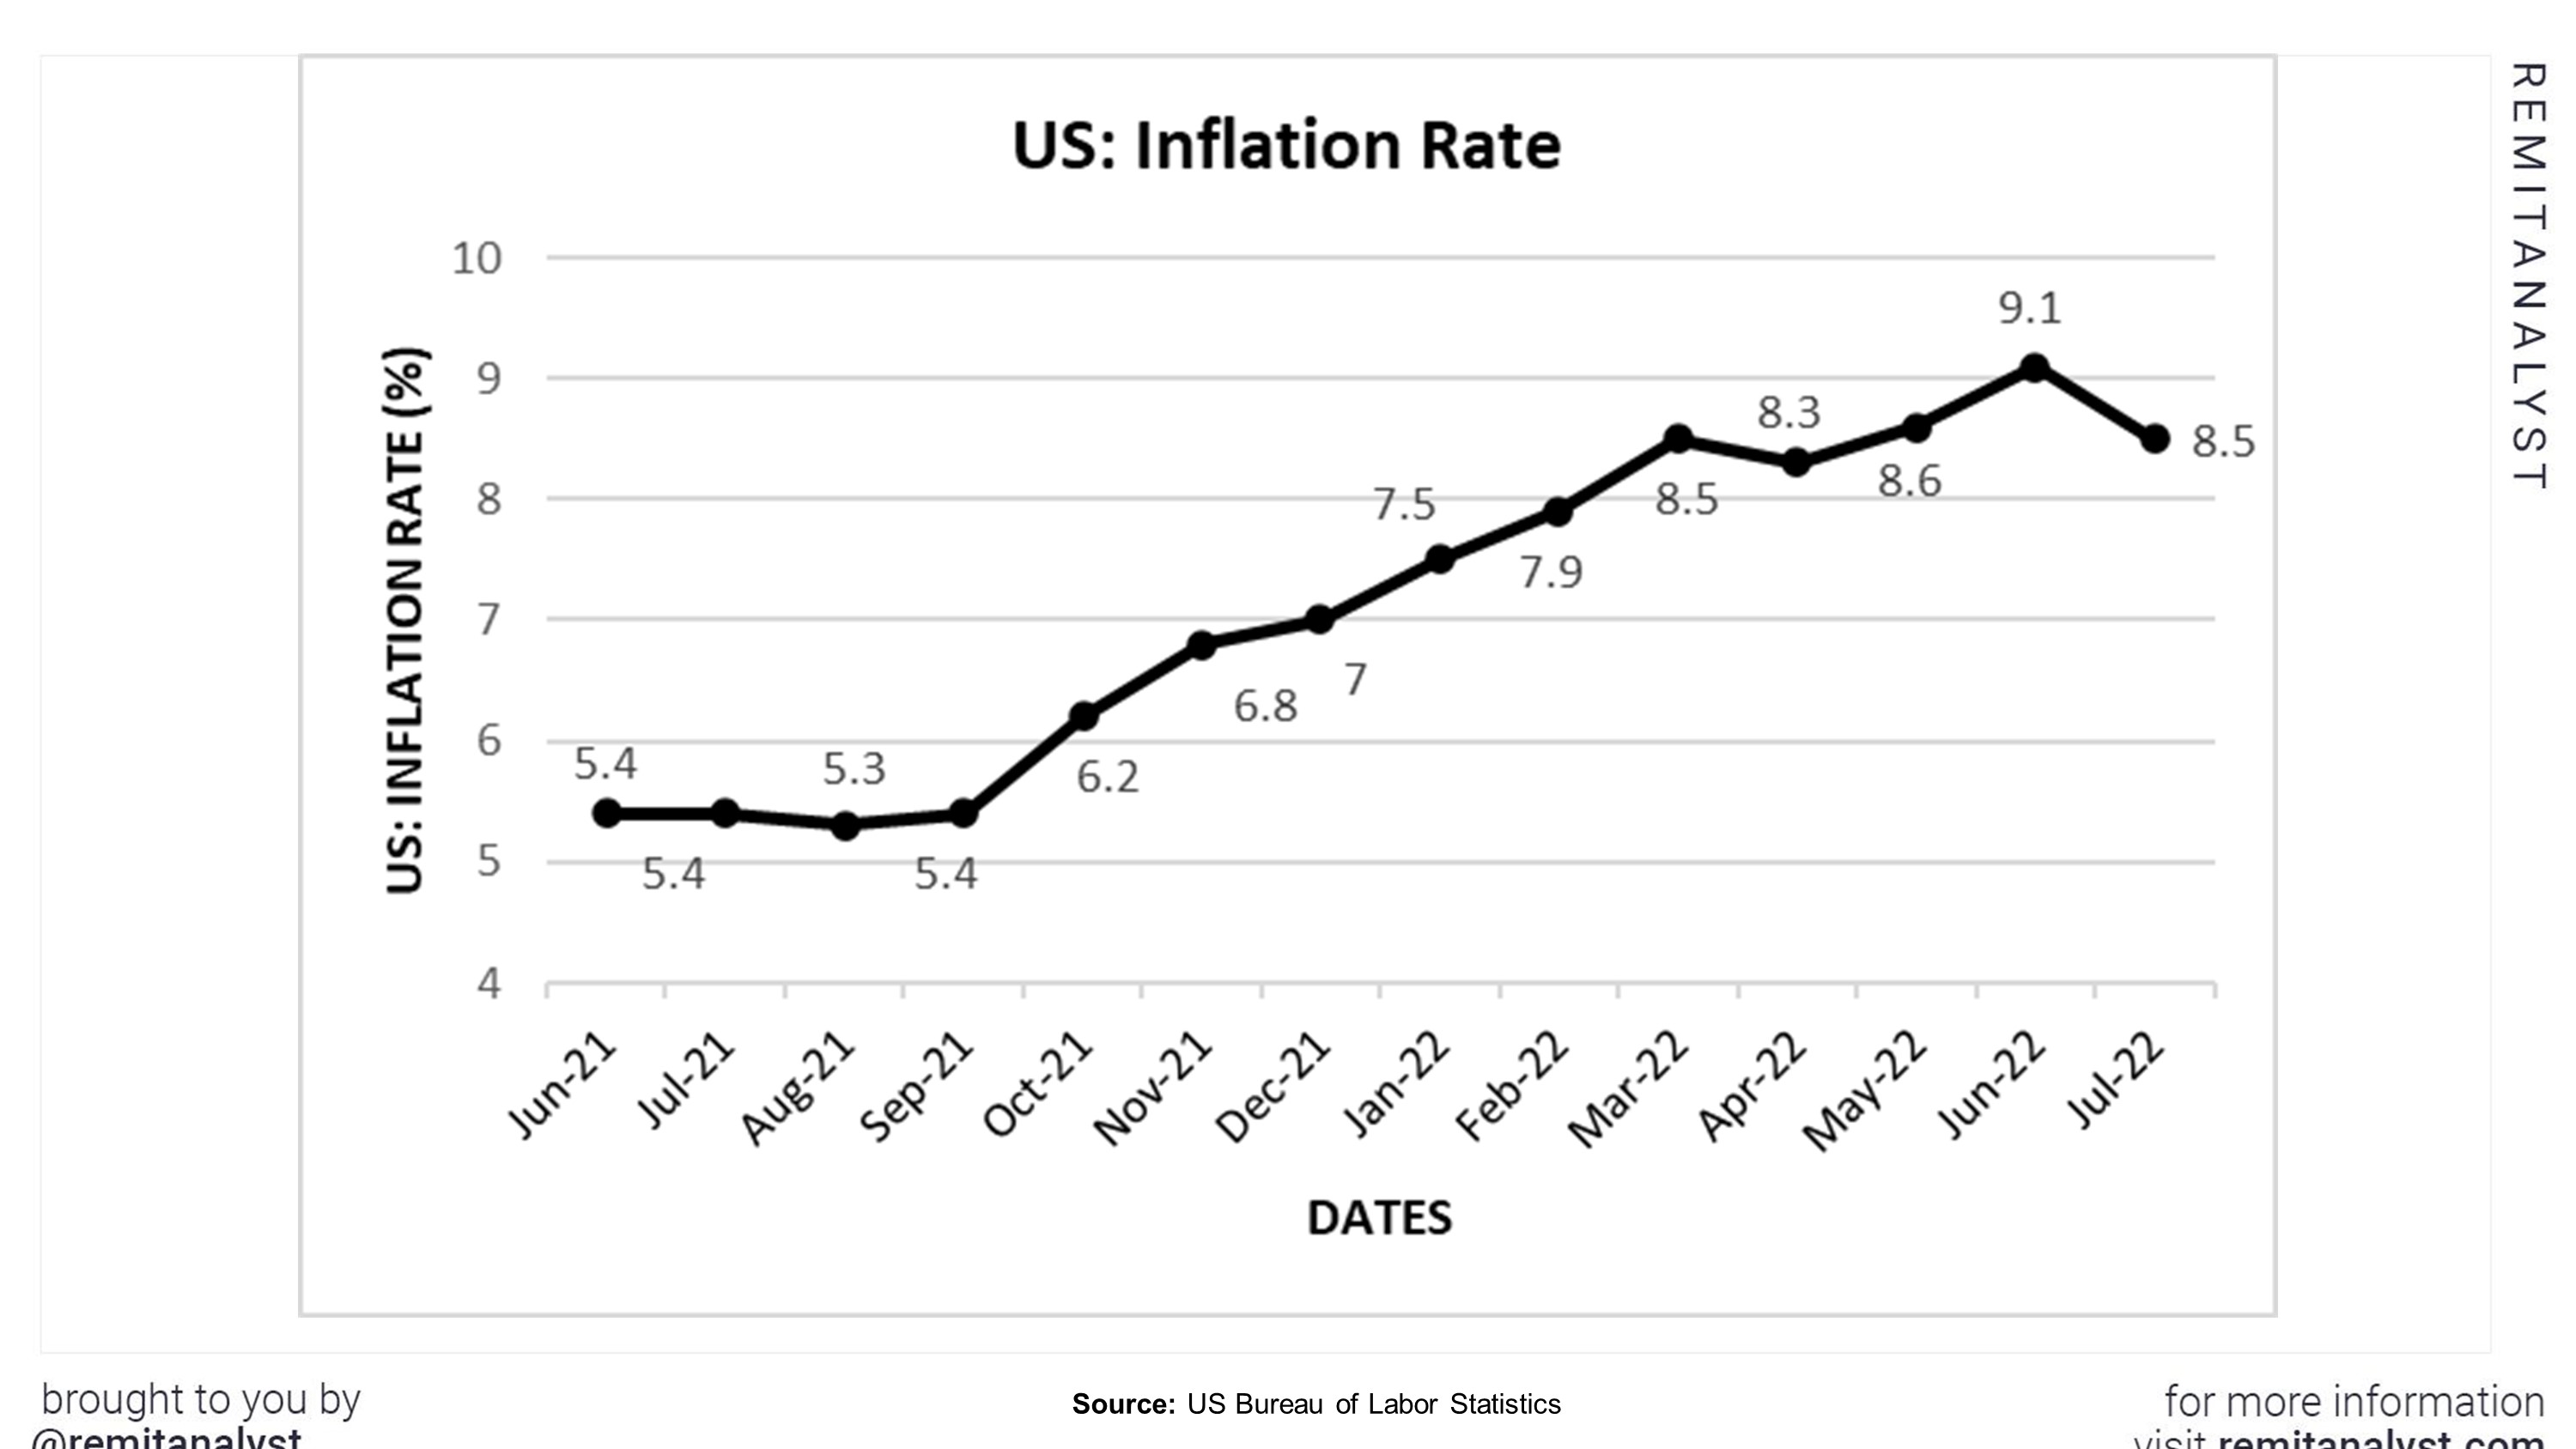 Inflation_Rates_in_US_from_June-2021_to_Jul-22.jpg